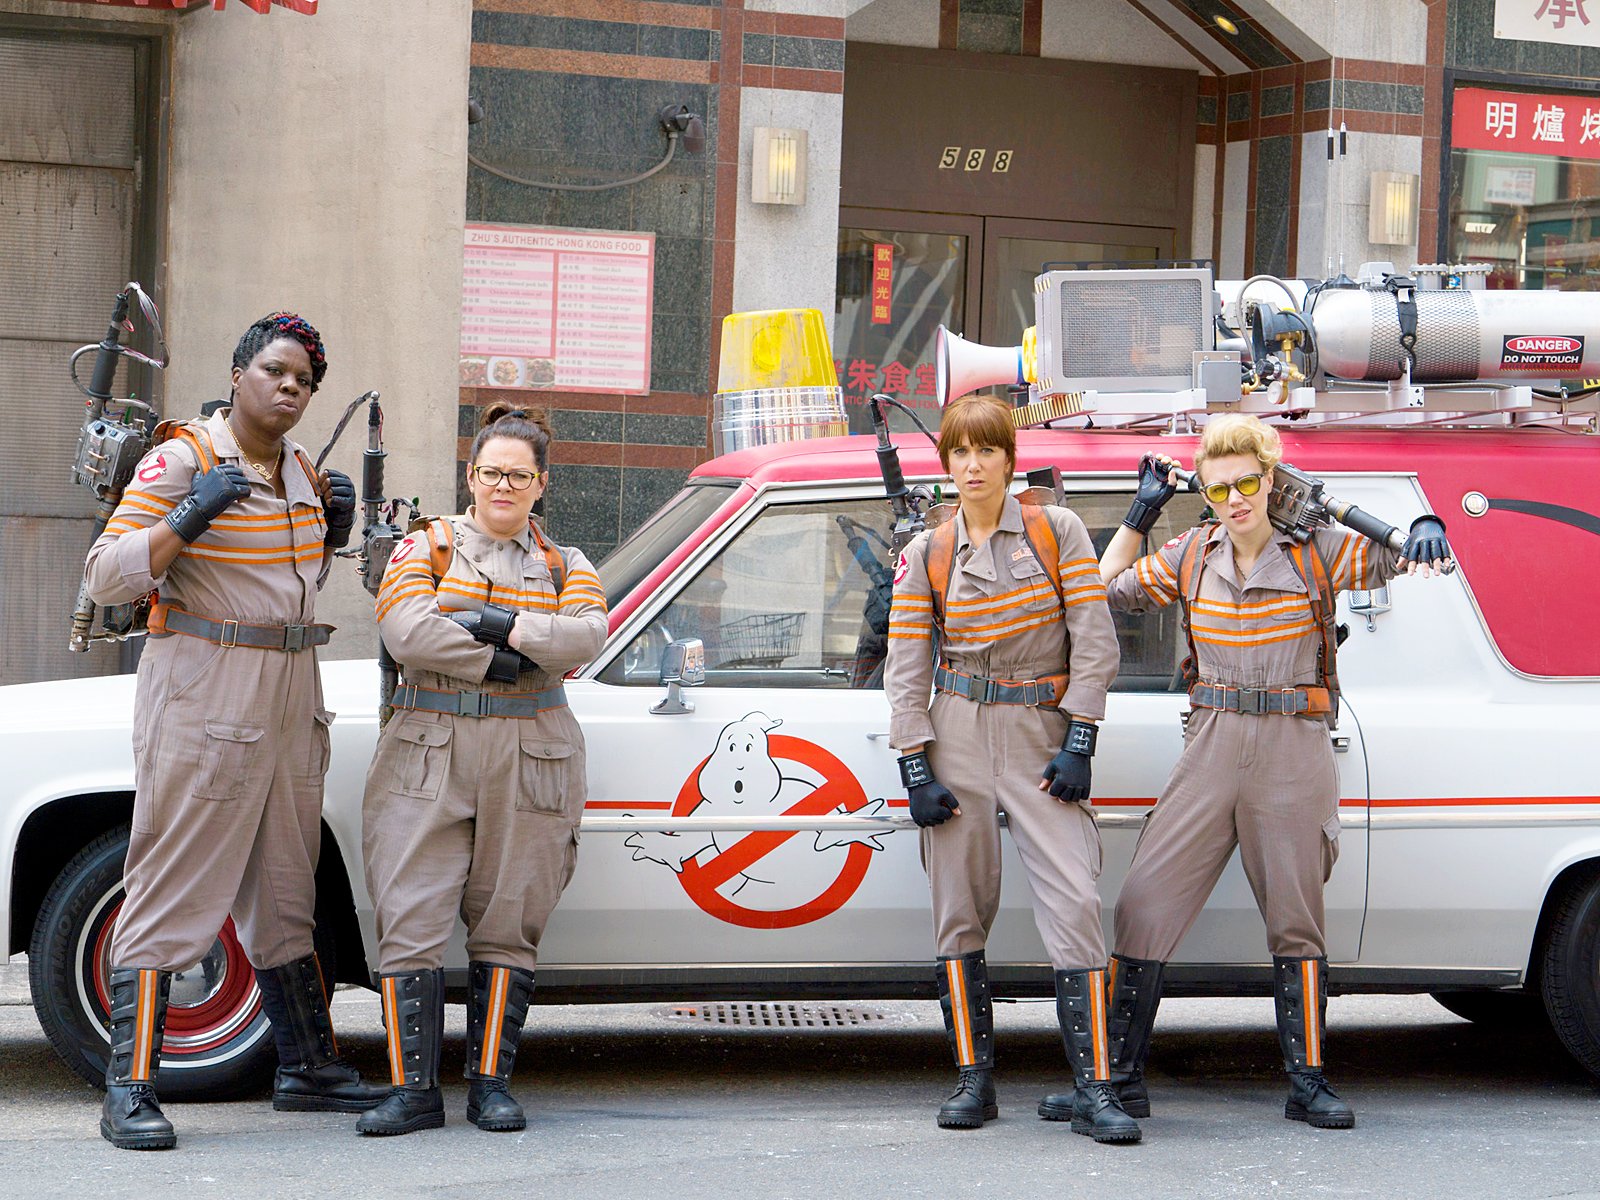 ghostbusters.